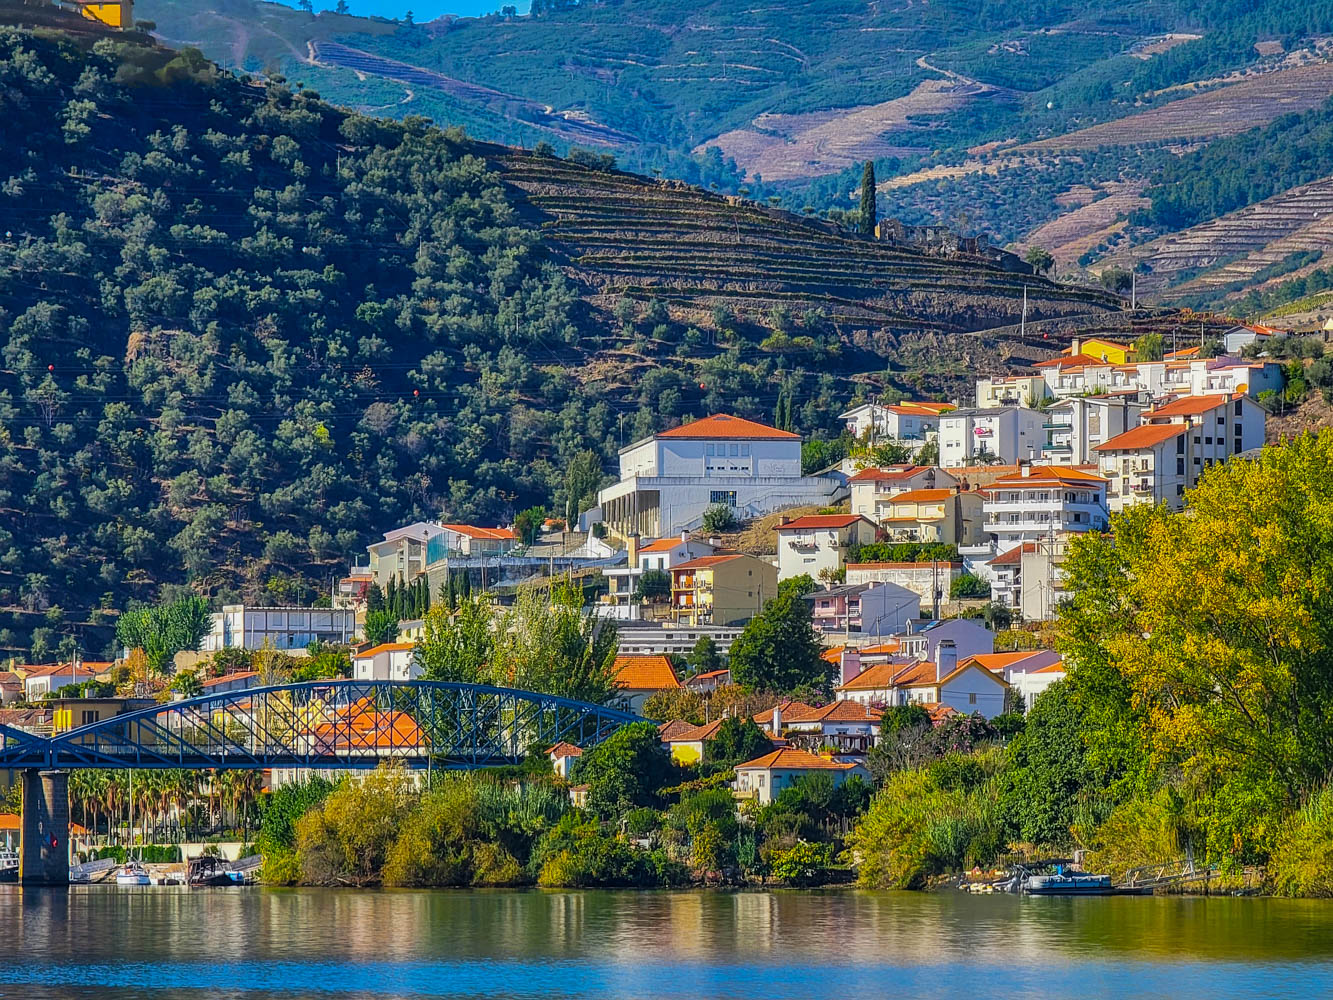 Towns in the Douro